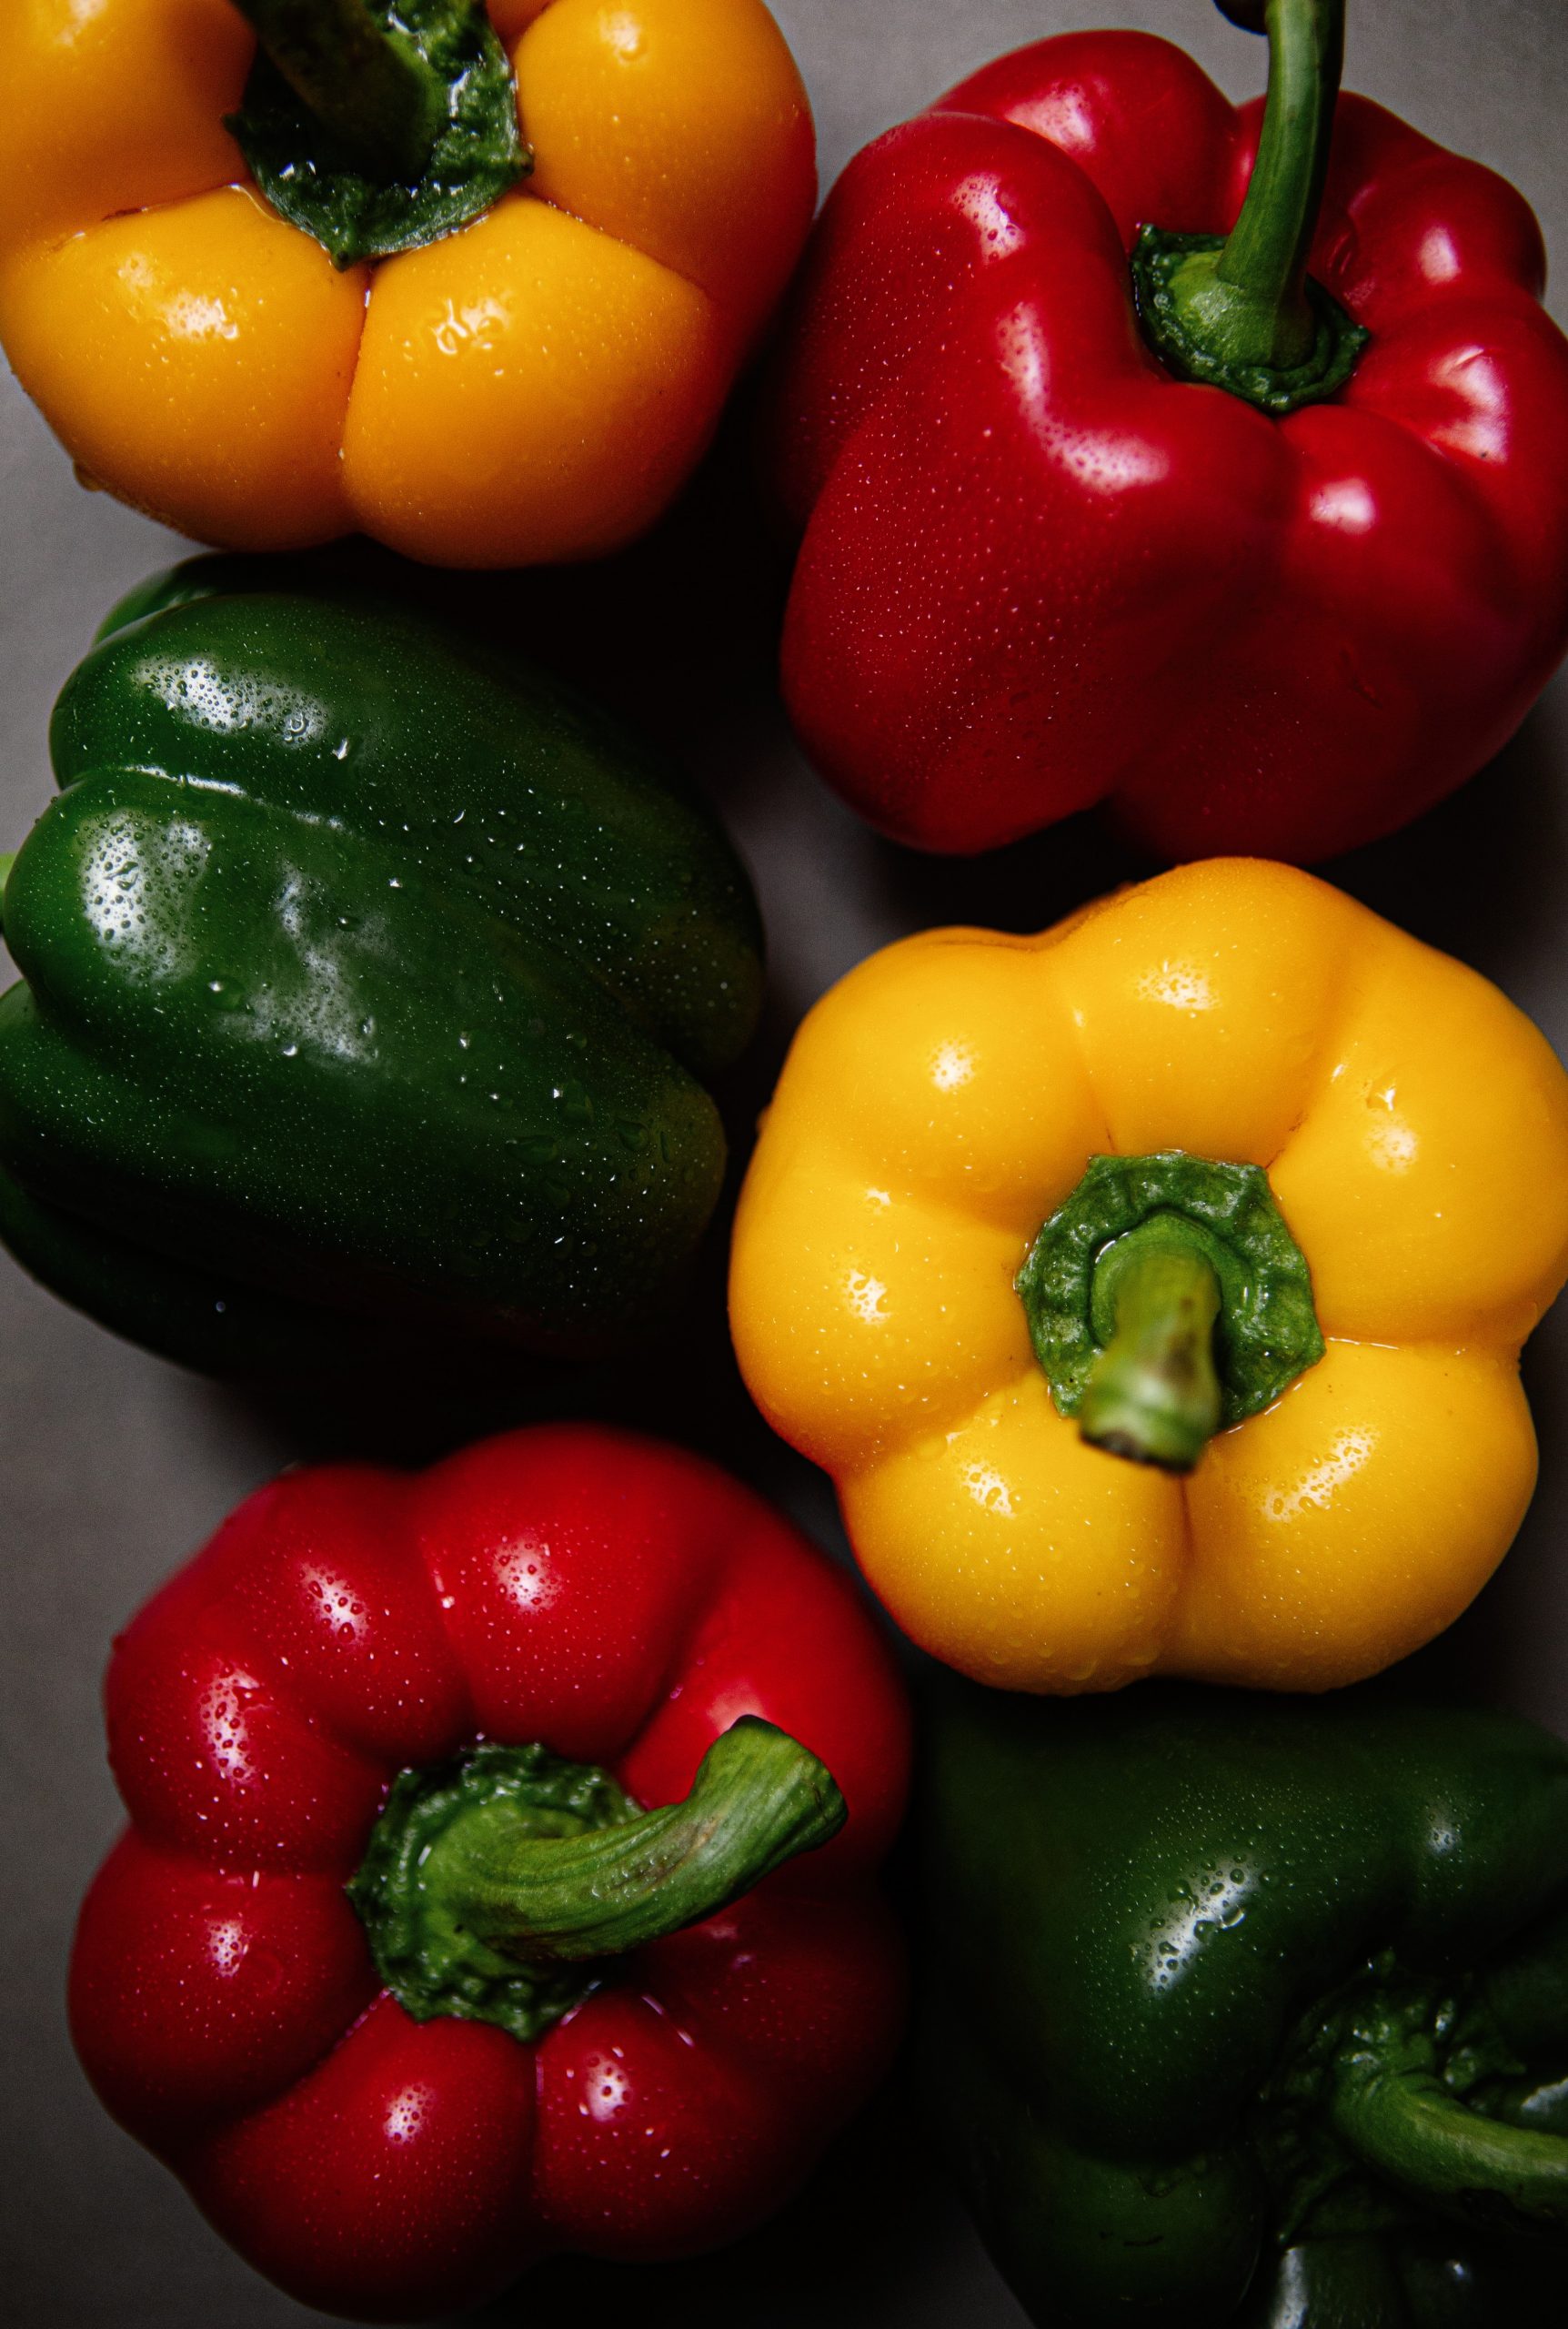 Can You Plant Seeds From A Store Bought Bell Pepper?